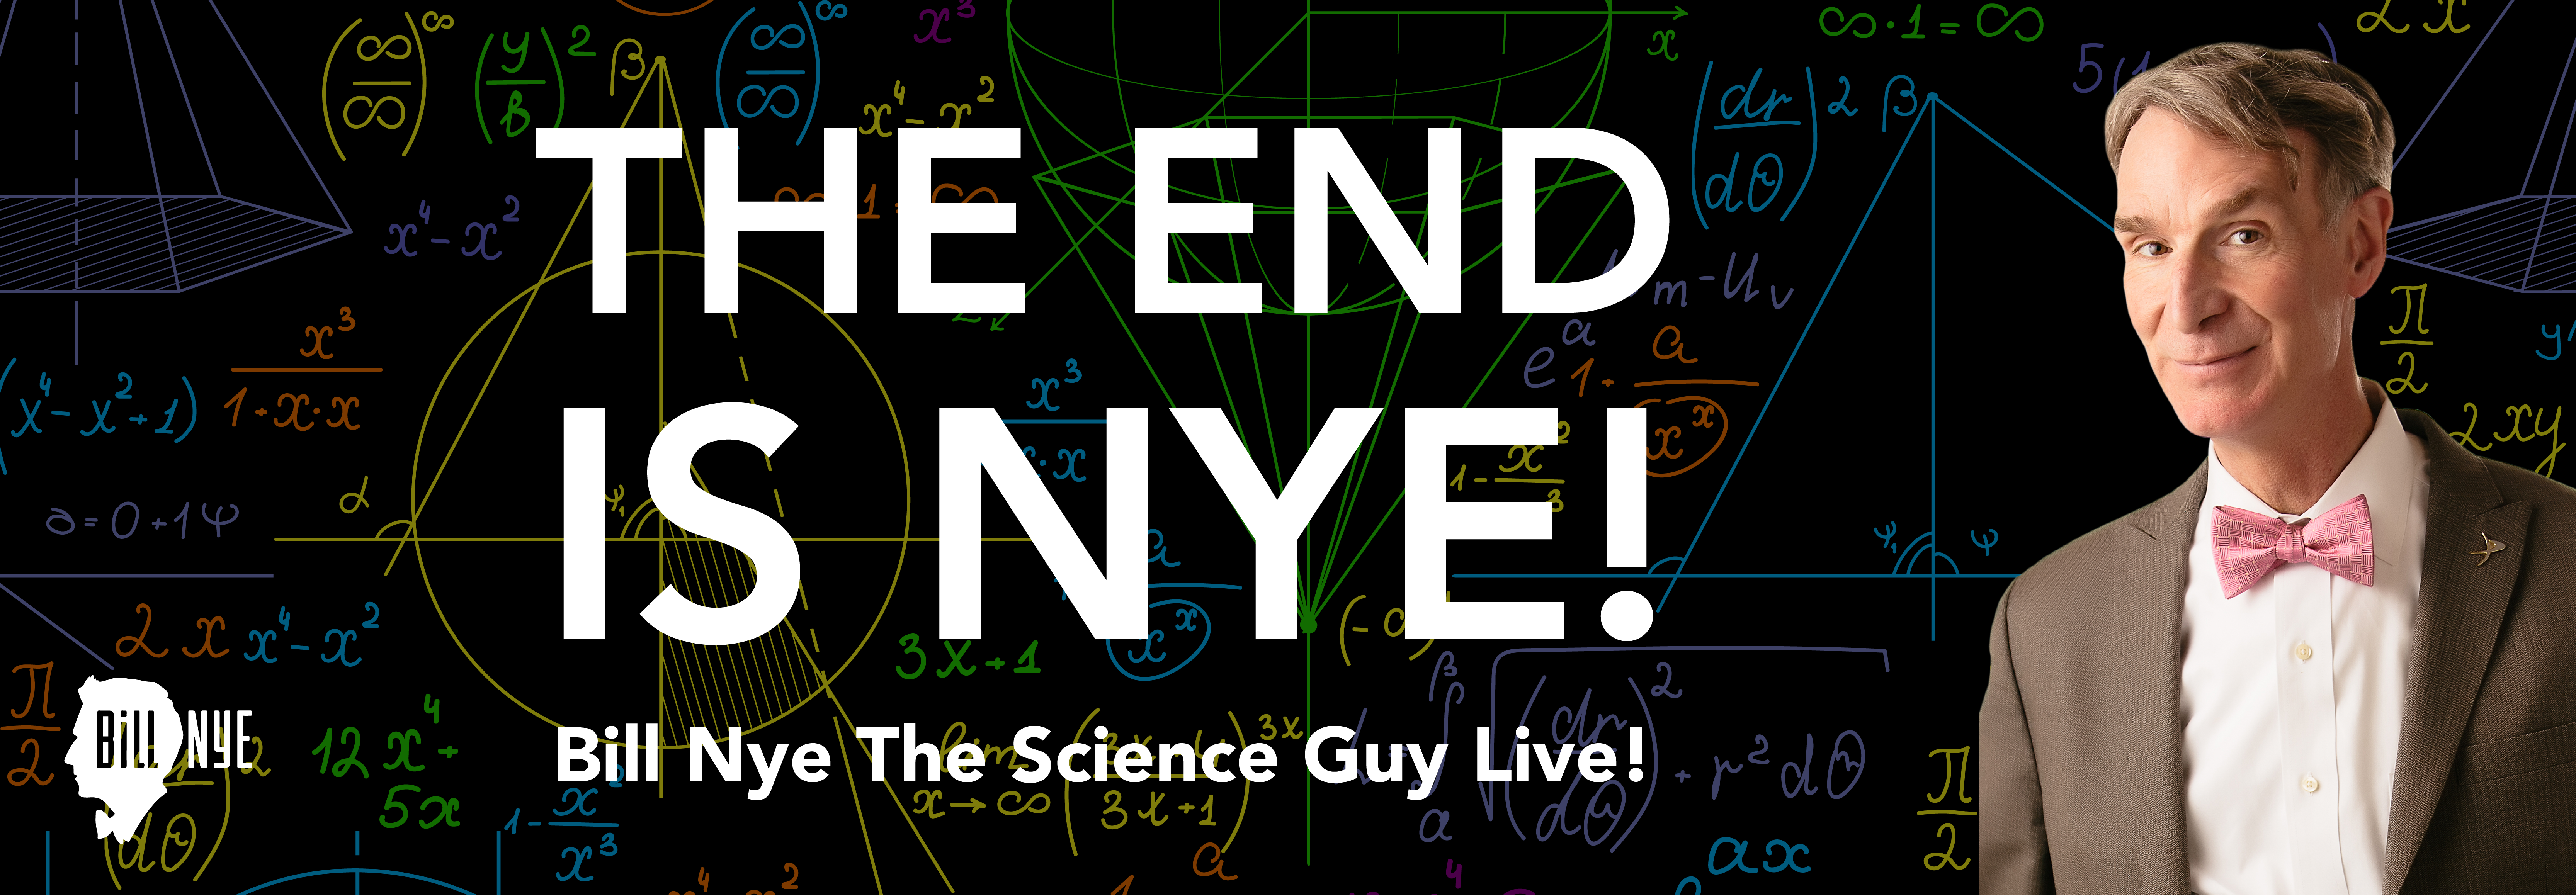 Bill Nye The Science Guy Live!